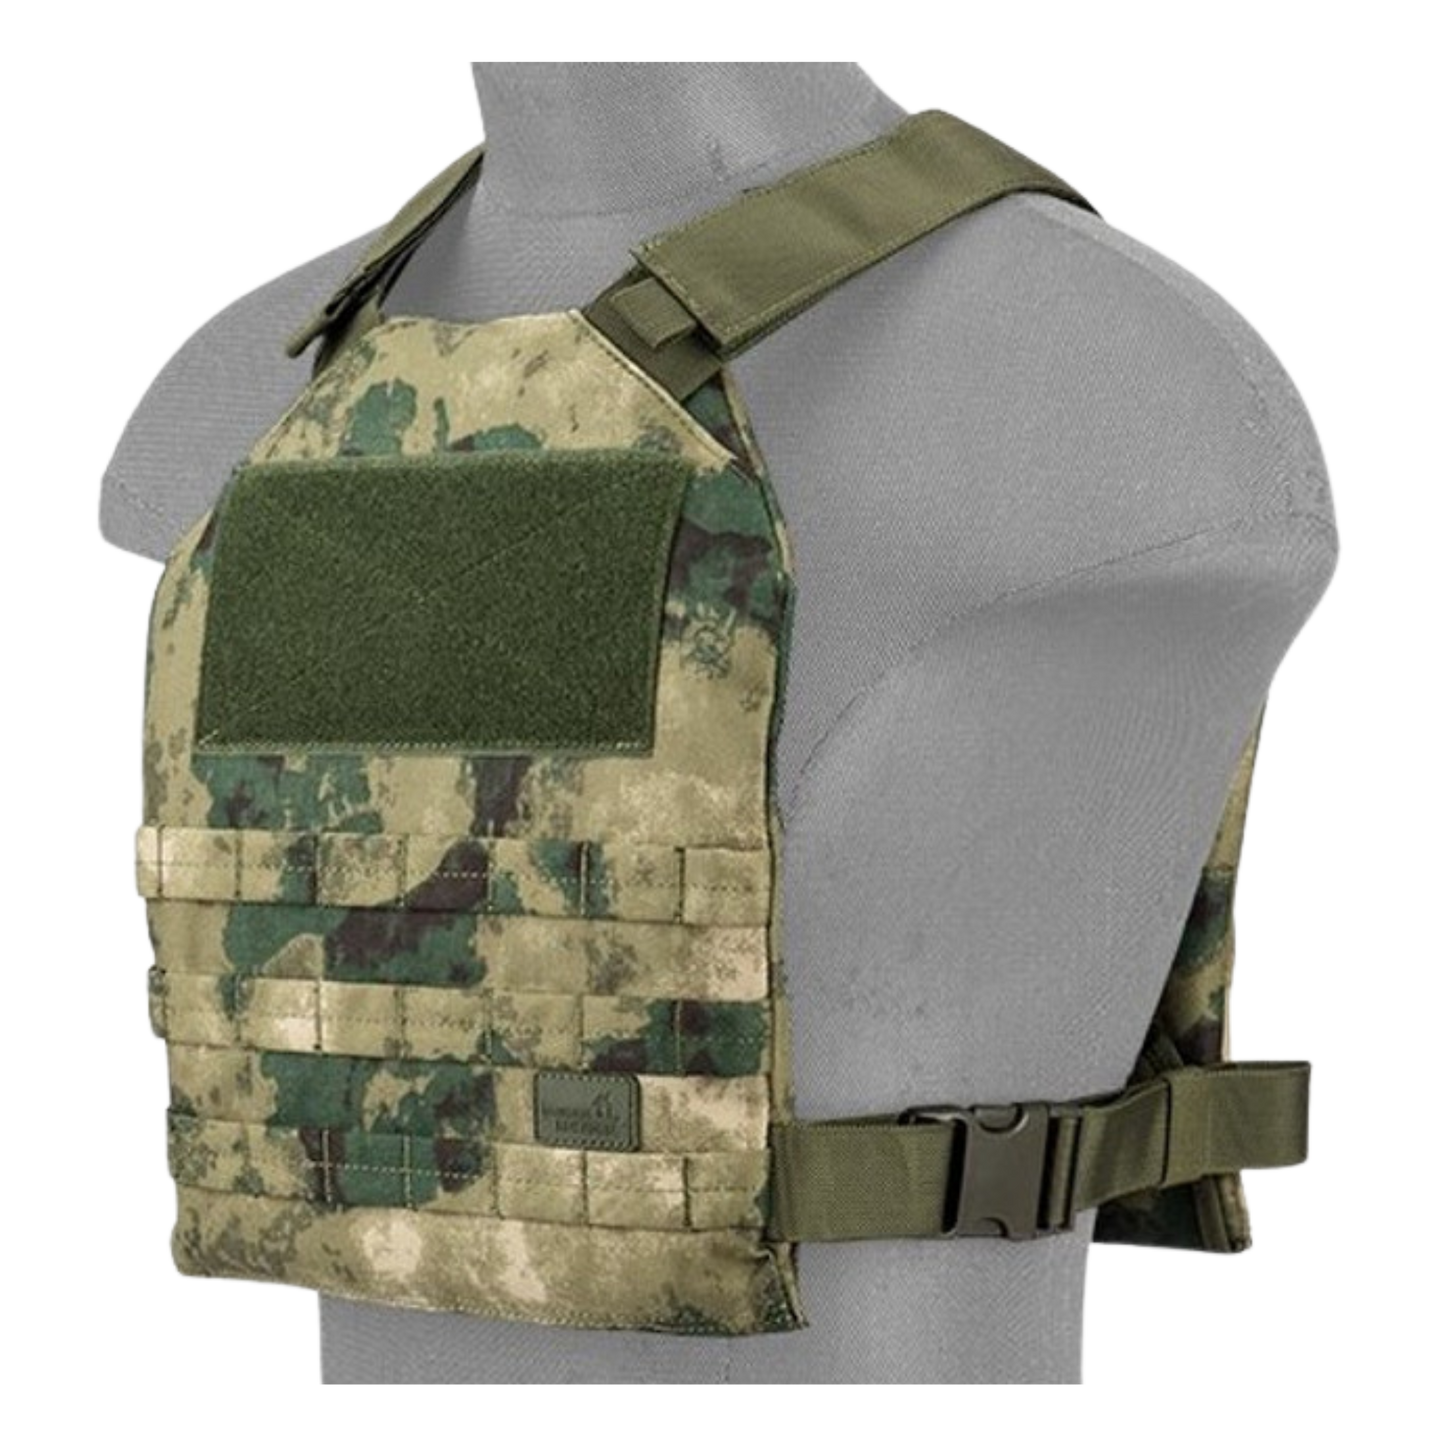 Lancer Tactical SI Minimalist Airsoft Plate Carrier